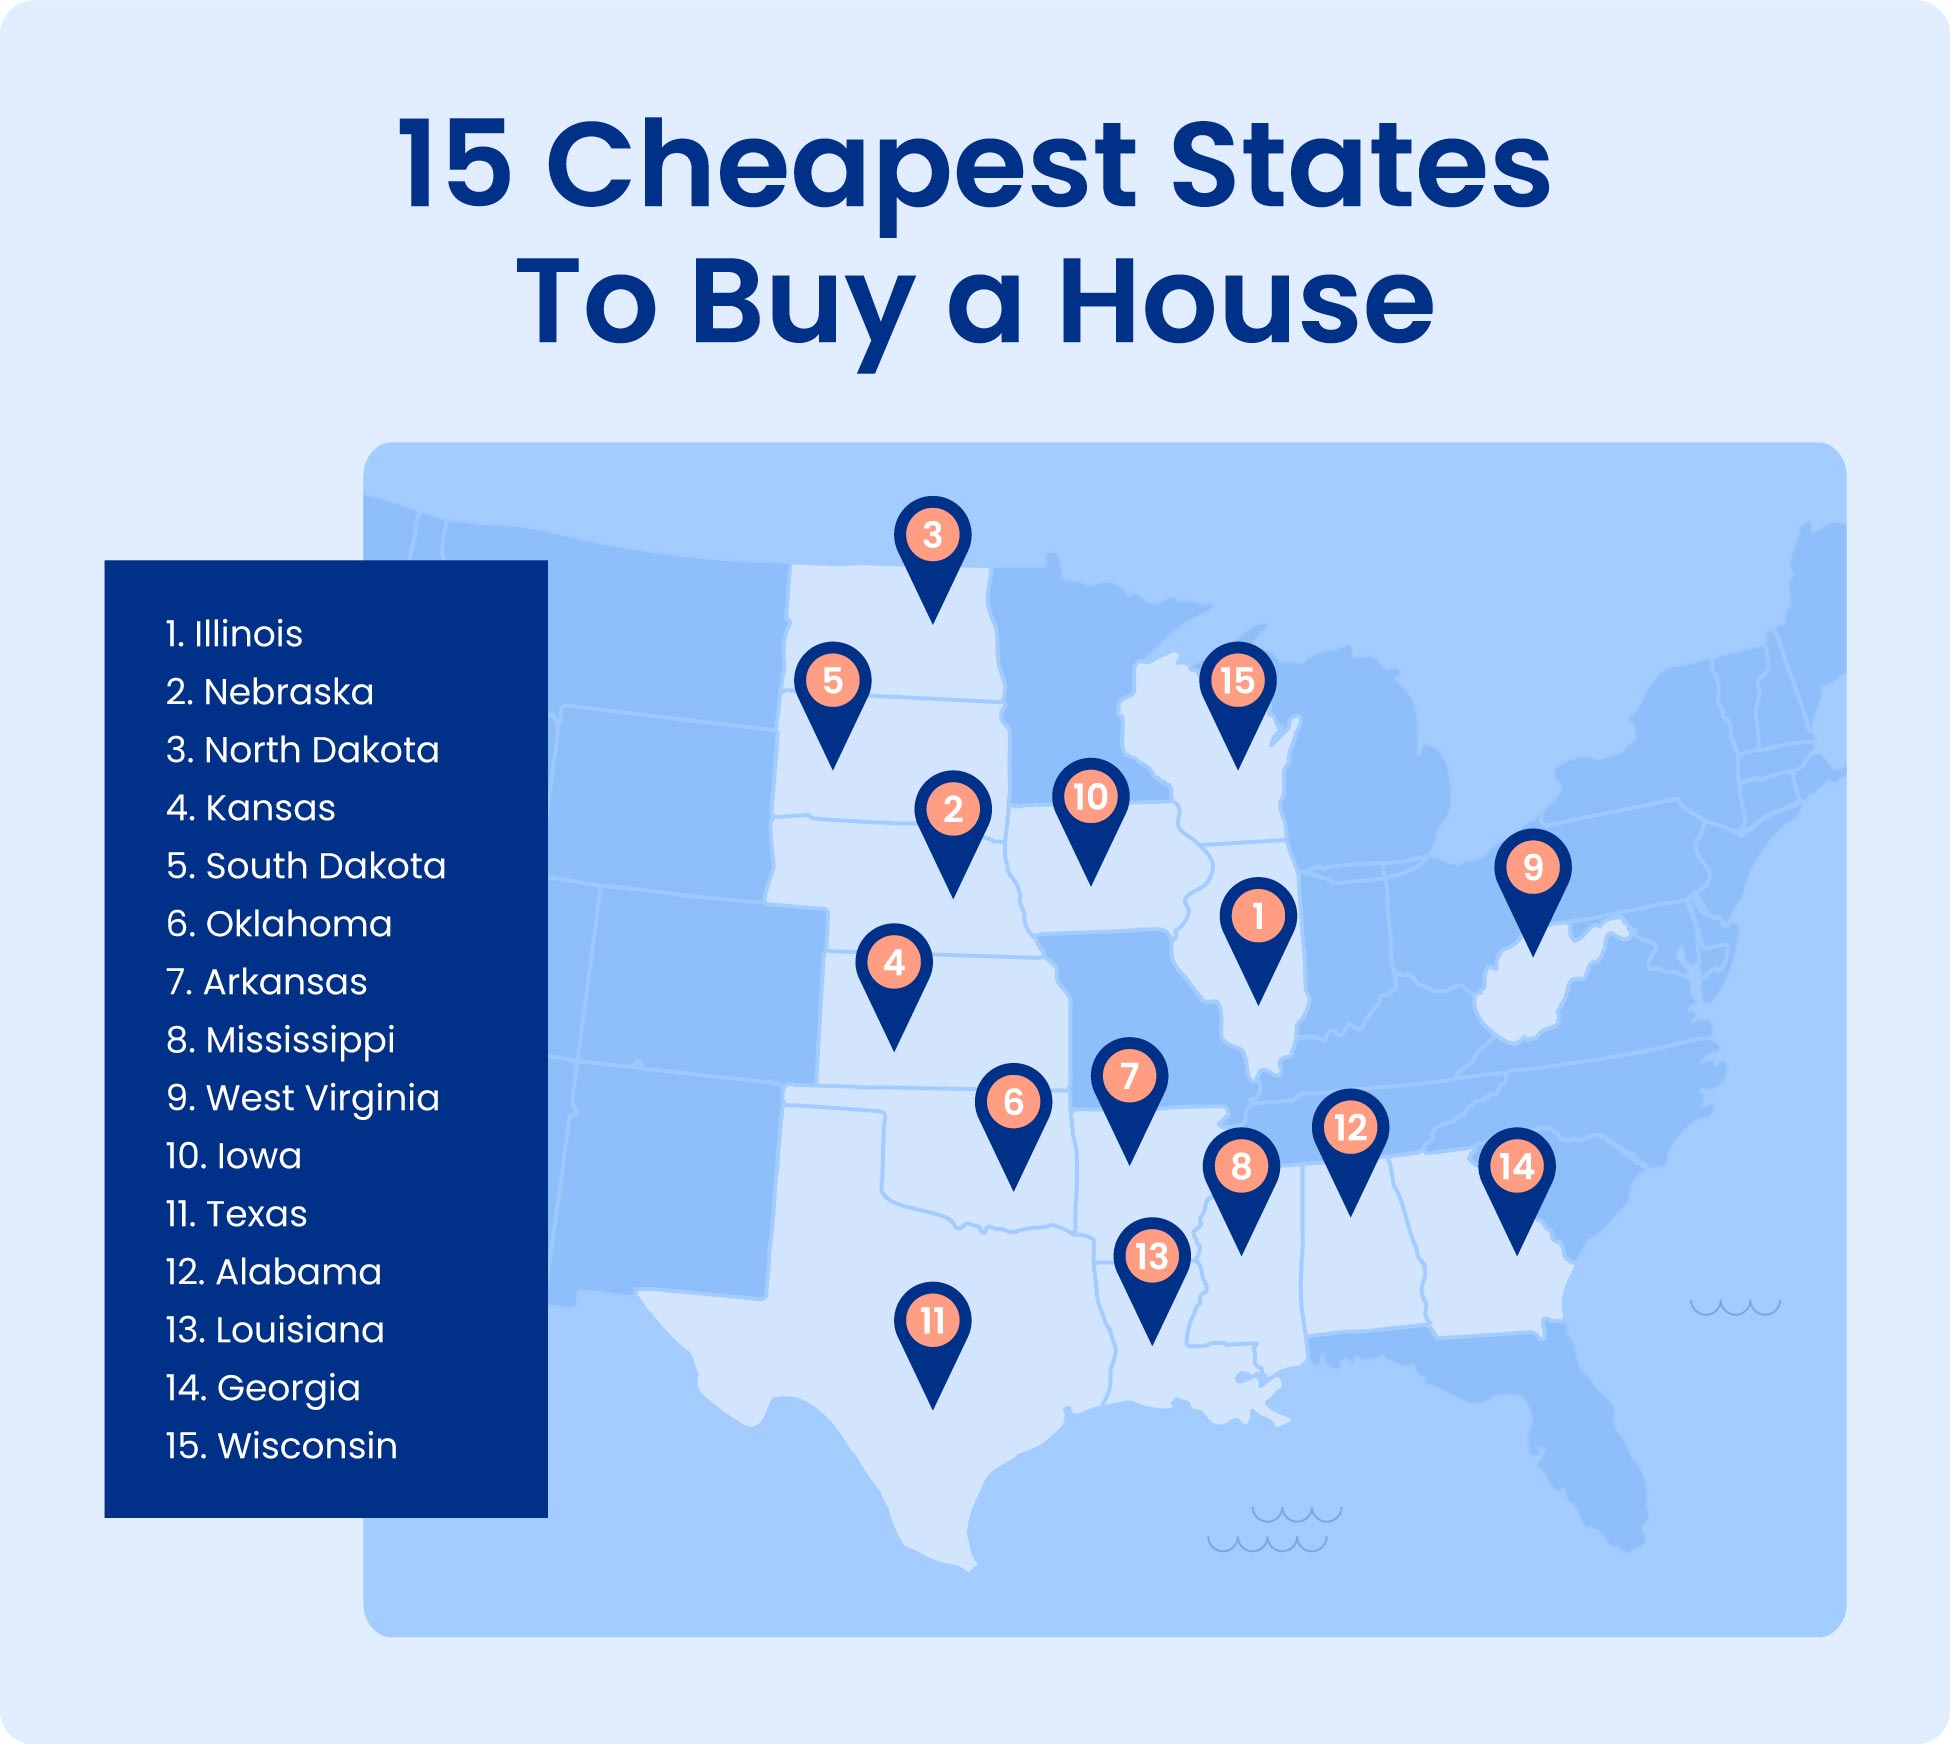 Map shows the cheapest states to buy a house.